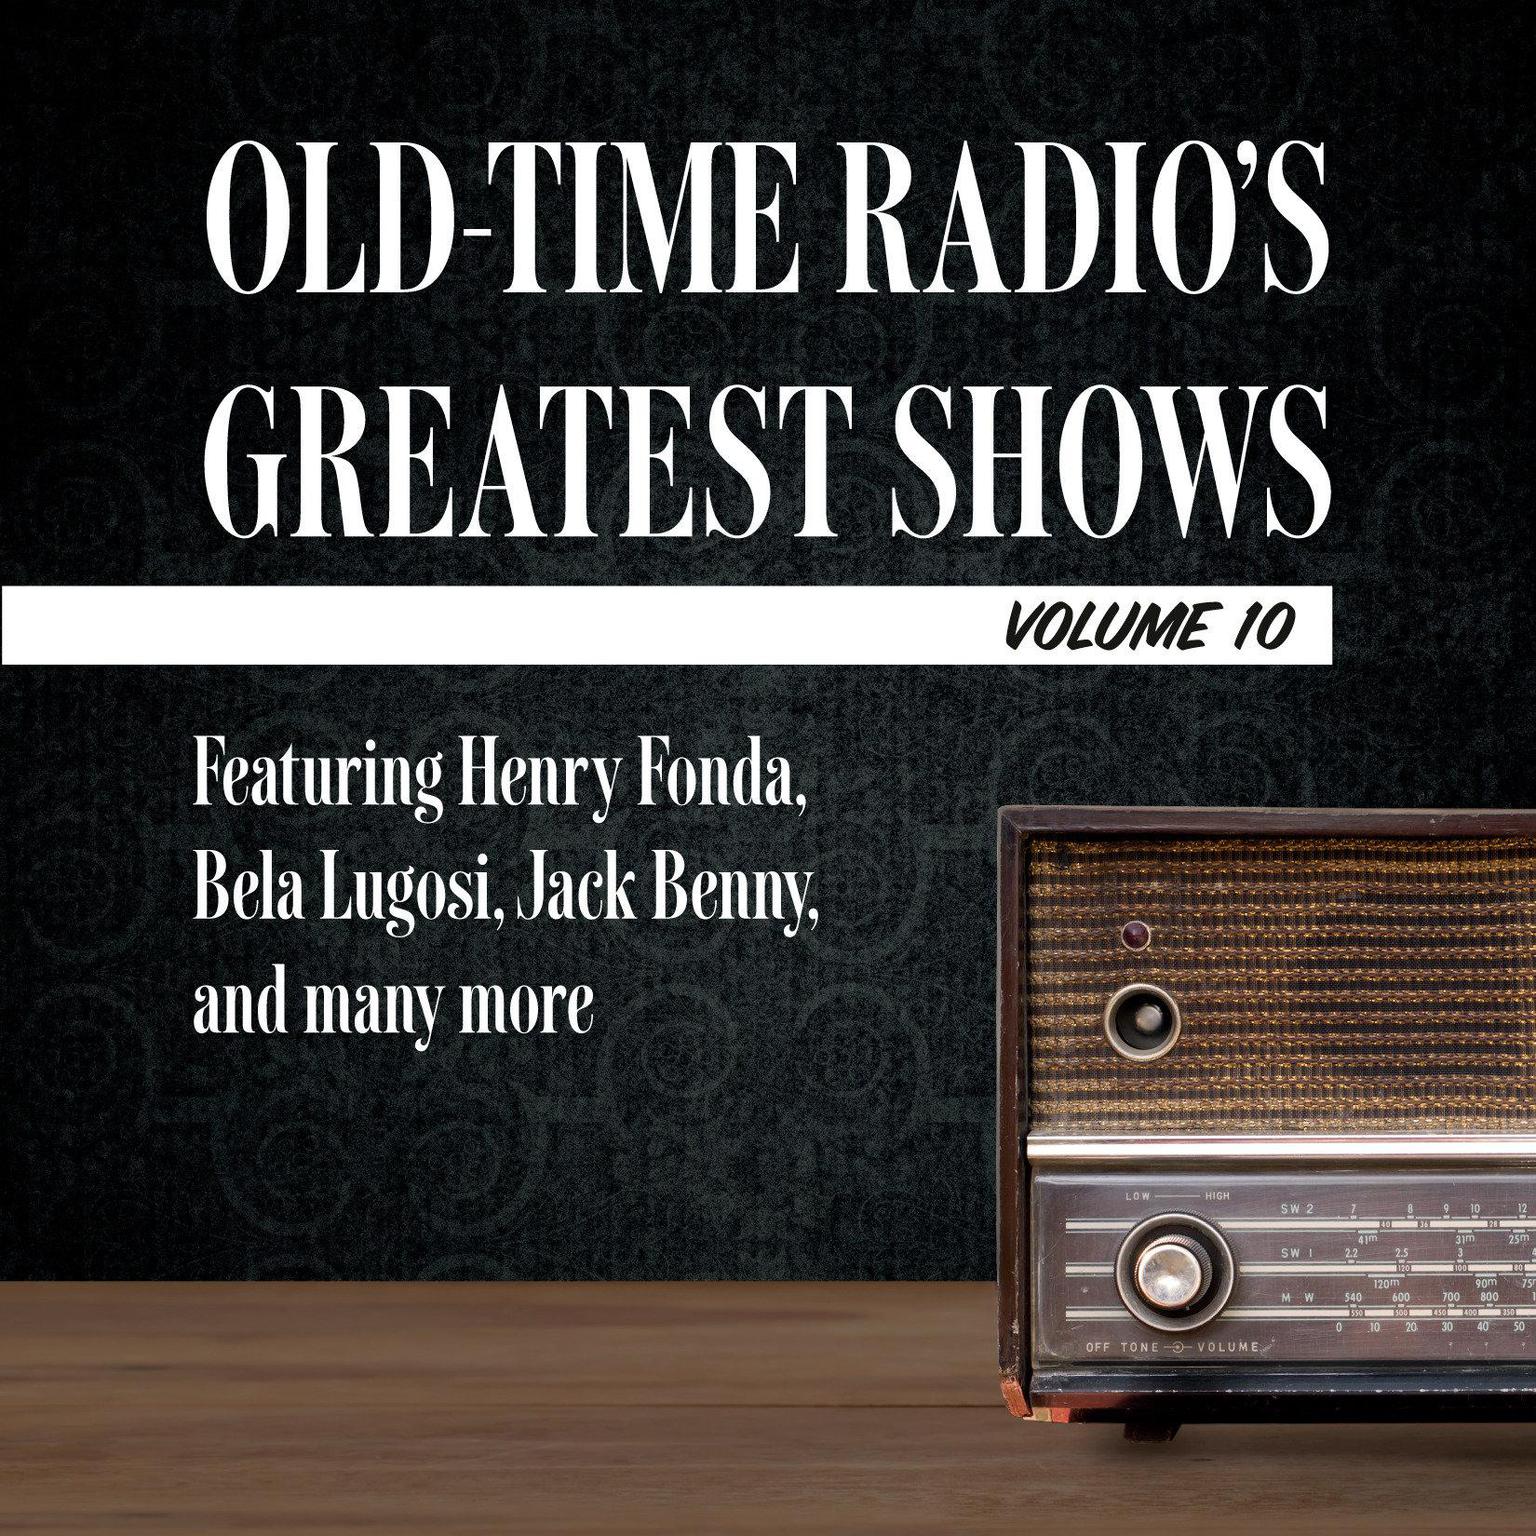 Old-Time Radios Greatest Shows, Volume 10: Featuring Henry Fonda, Bela Lugosi, Jack Benny, and many more Audiobook, by Author Info Added Soon